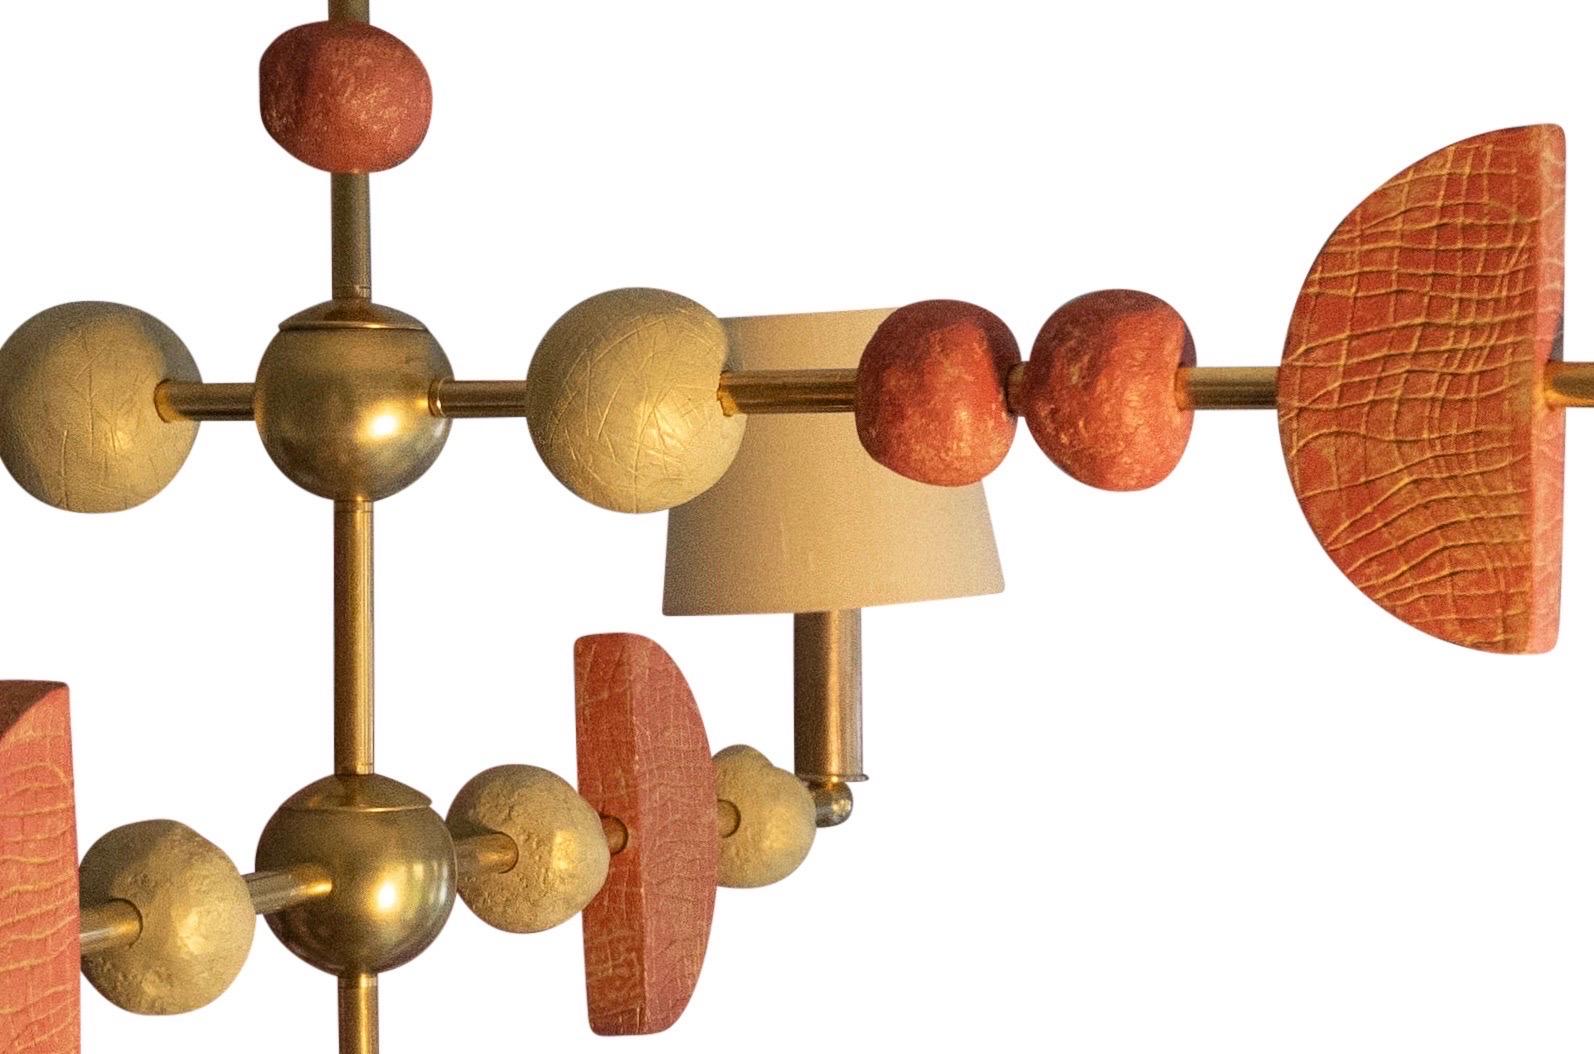 English Soho Chandelier, Contemporary, Brass with Sculpted Spheres by Margit Wittig For Sale